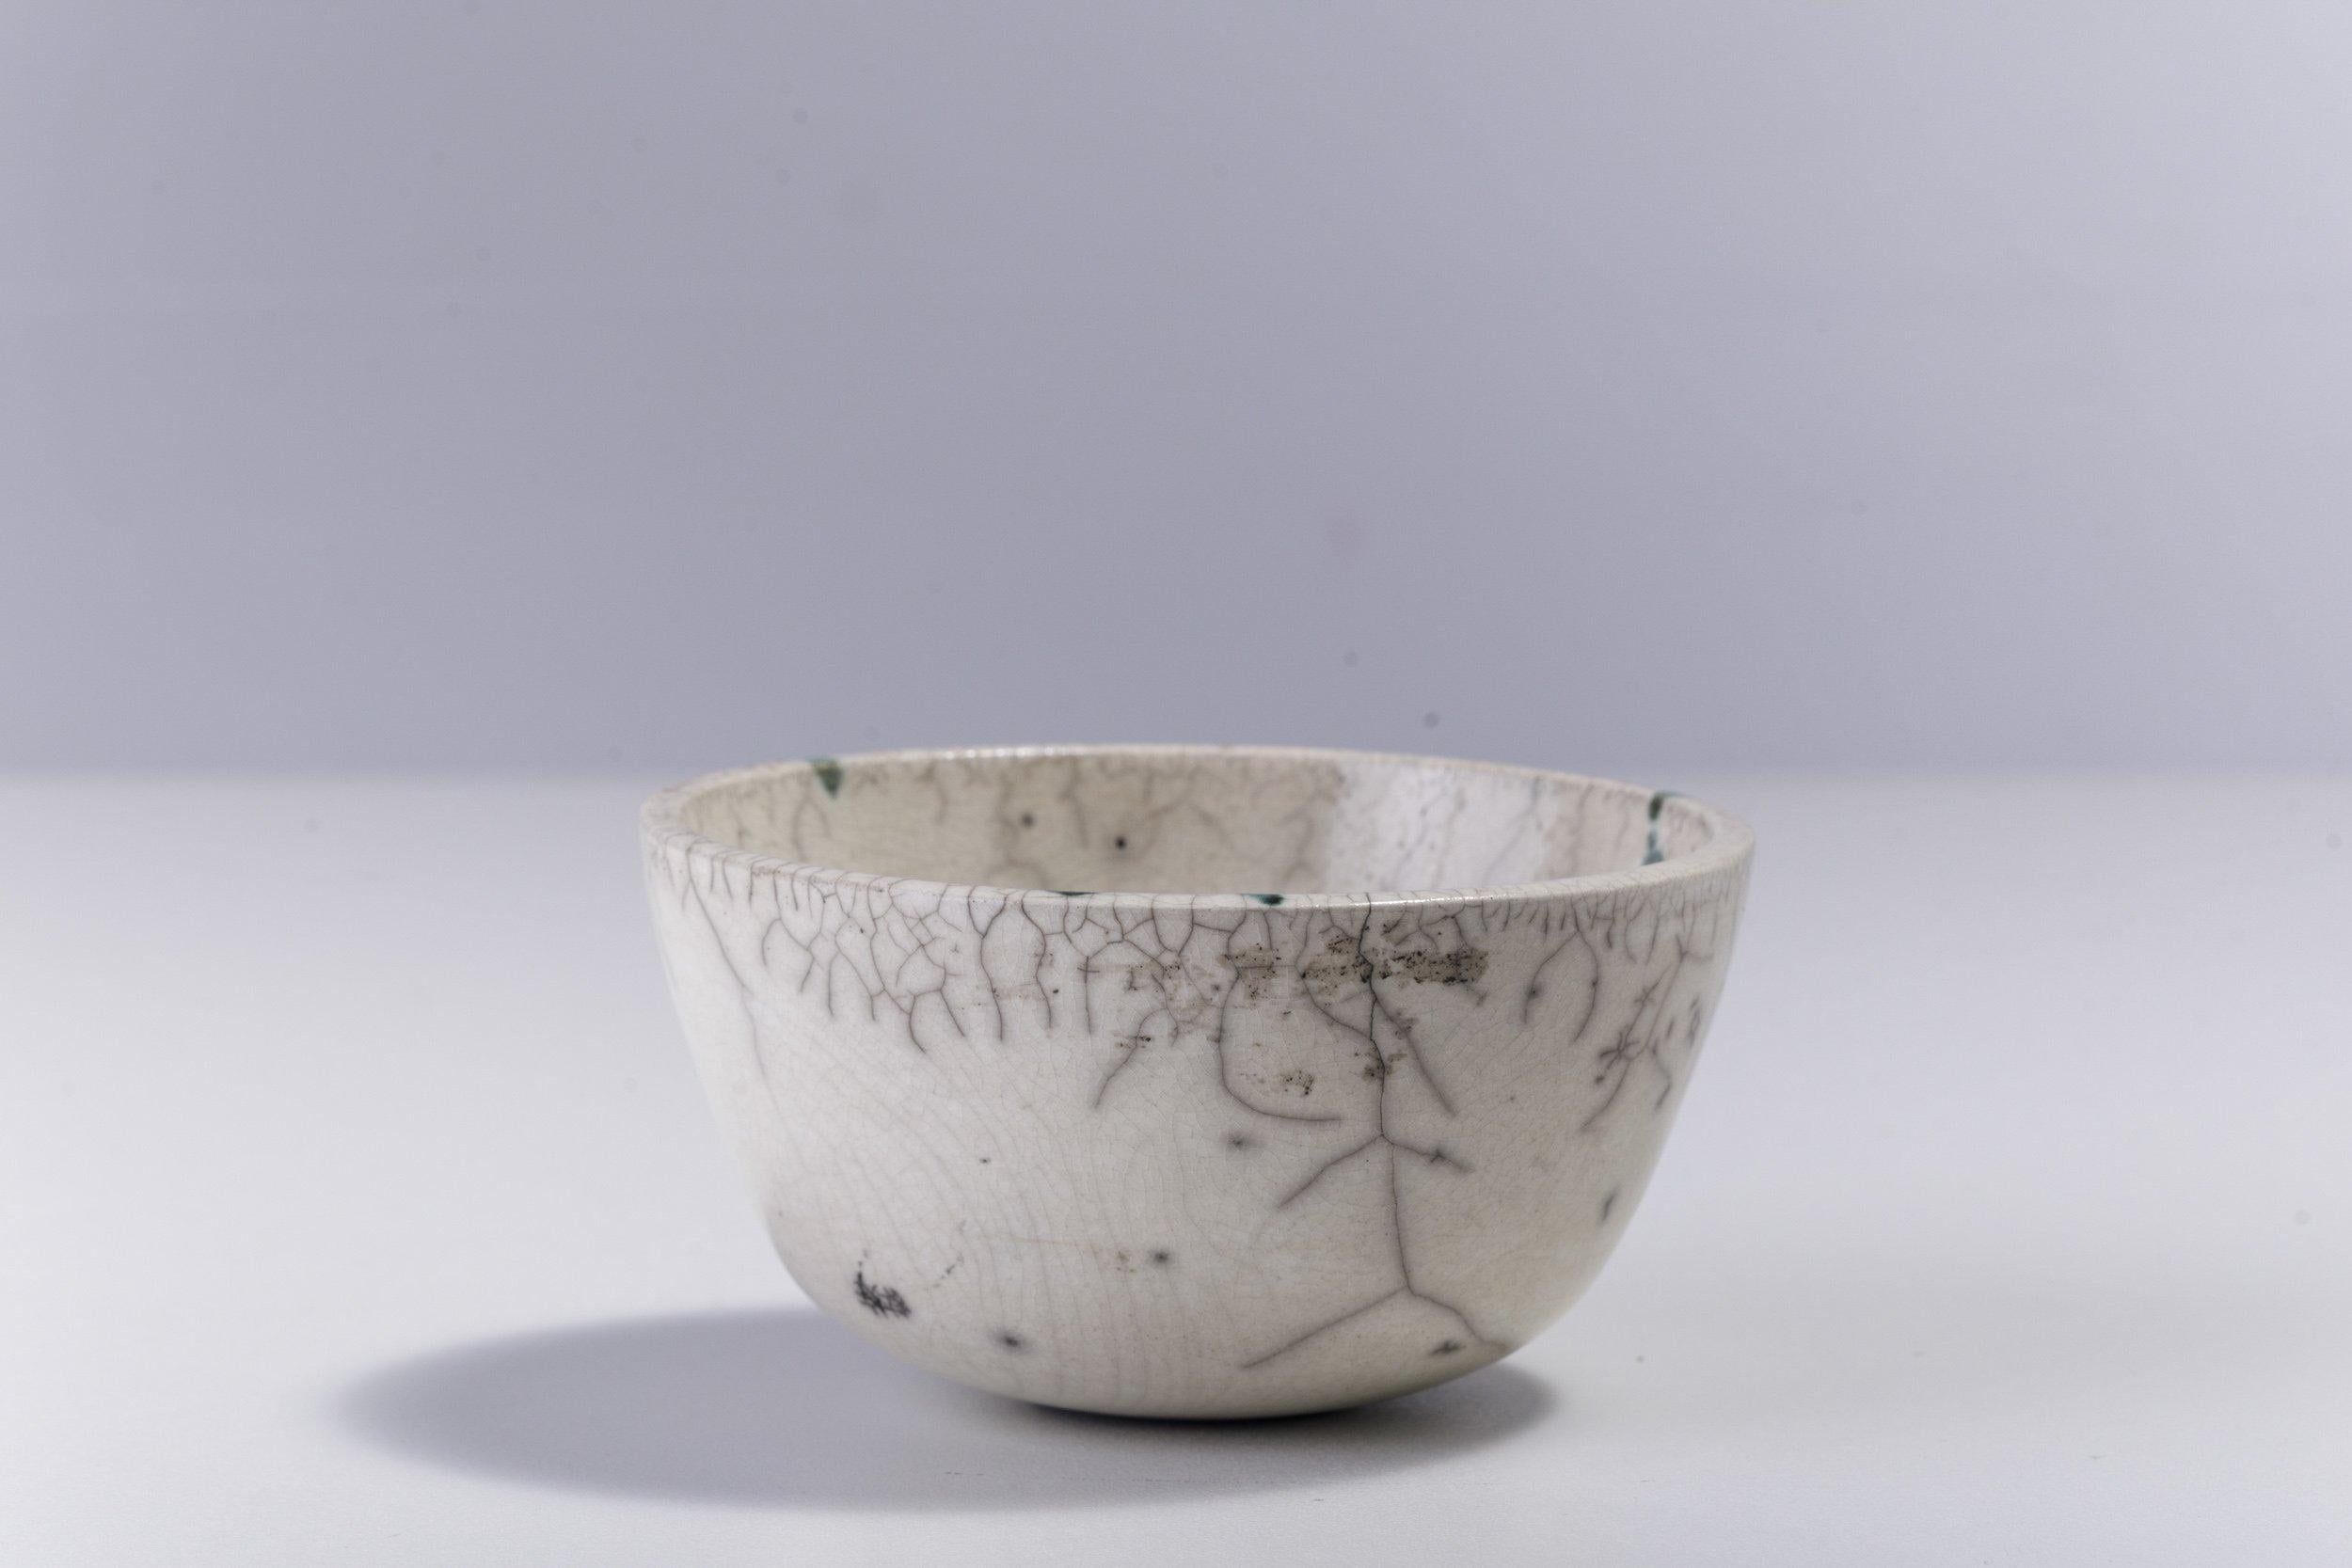 Contemporary LAAB Moss Bowl Ceramic Raku Green White In New Condition For Sale In monza, Monza and Brianza